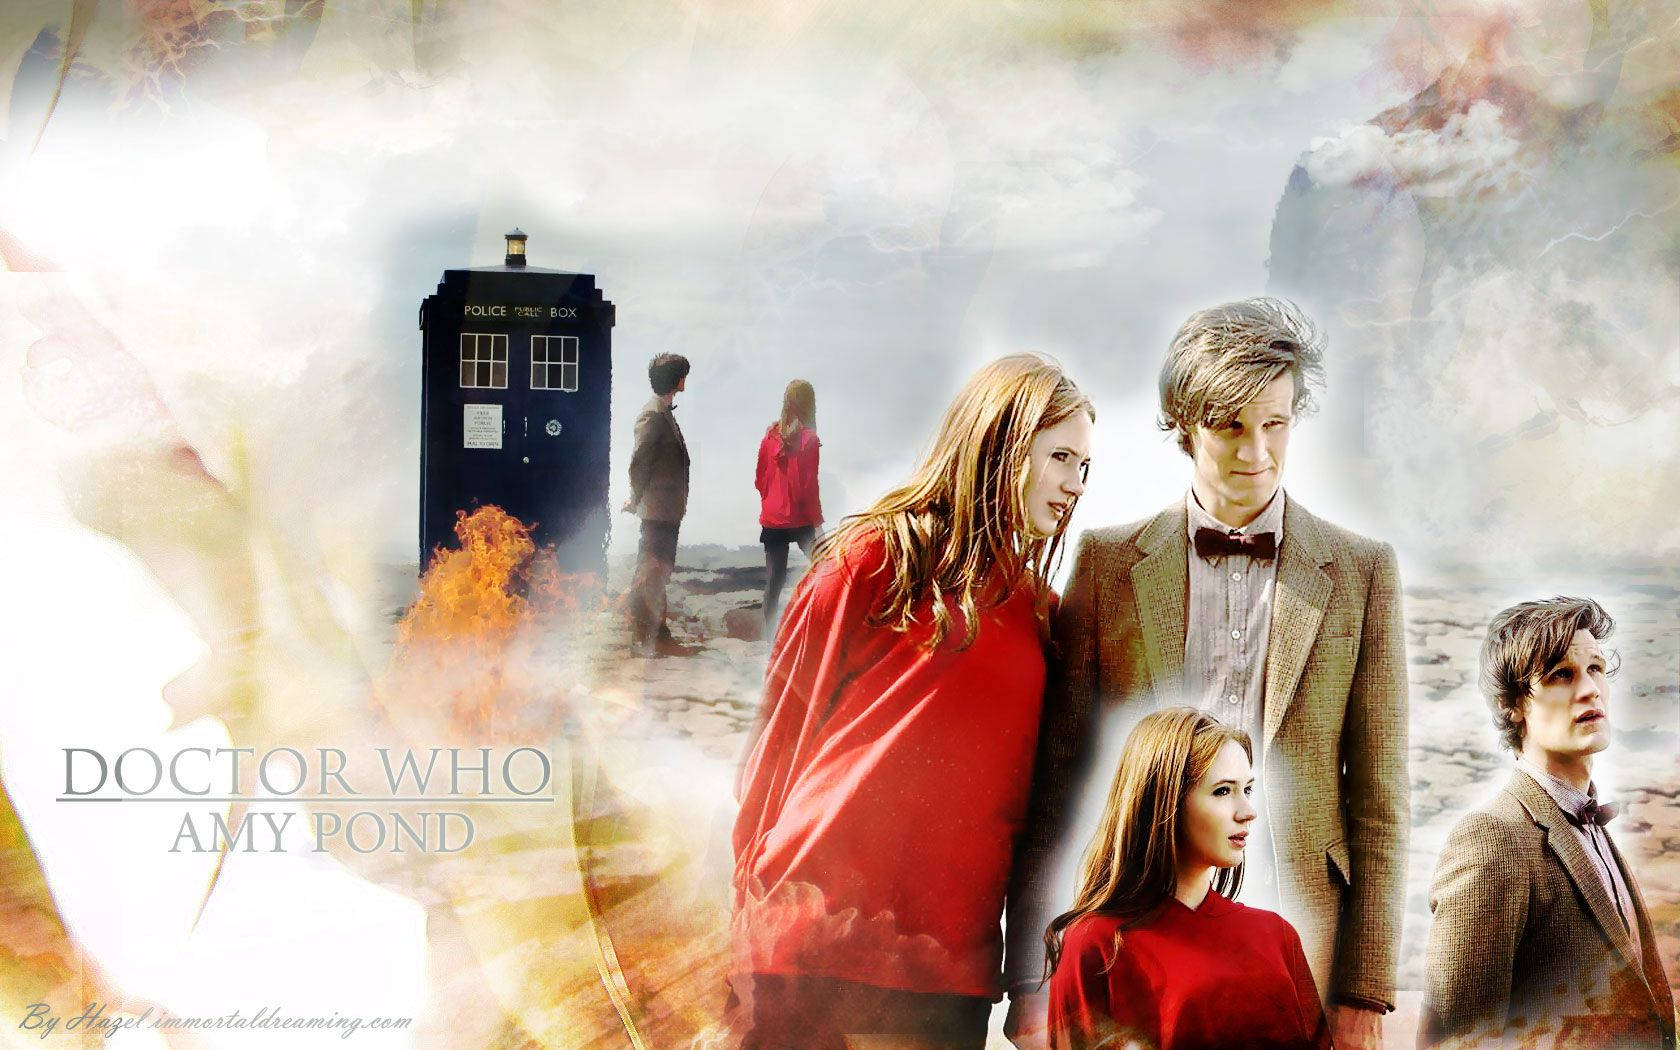 The Eleventh Doctor And Amy Pond Of Doctor Who In The Tardis